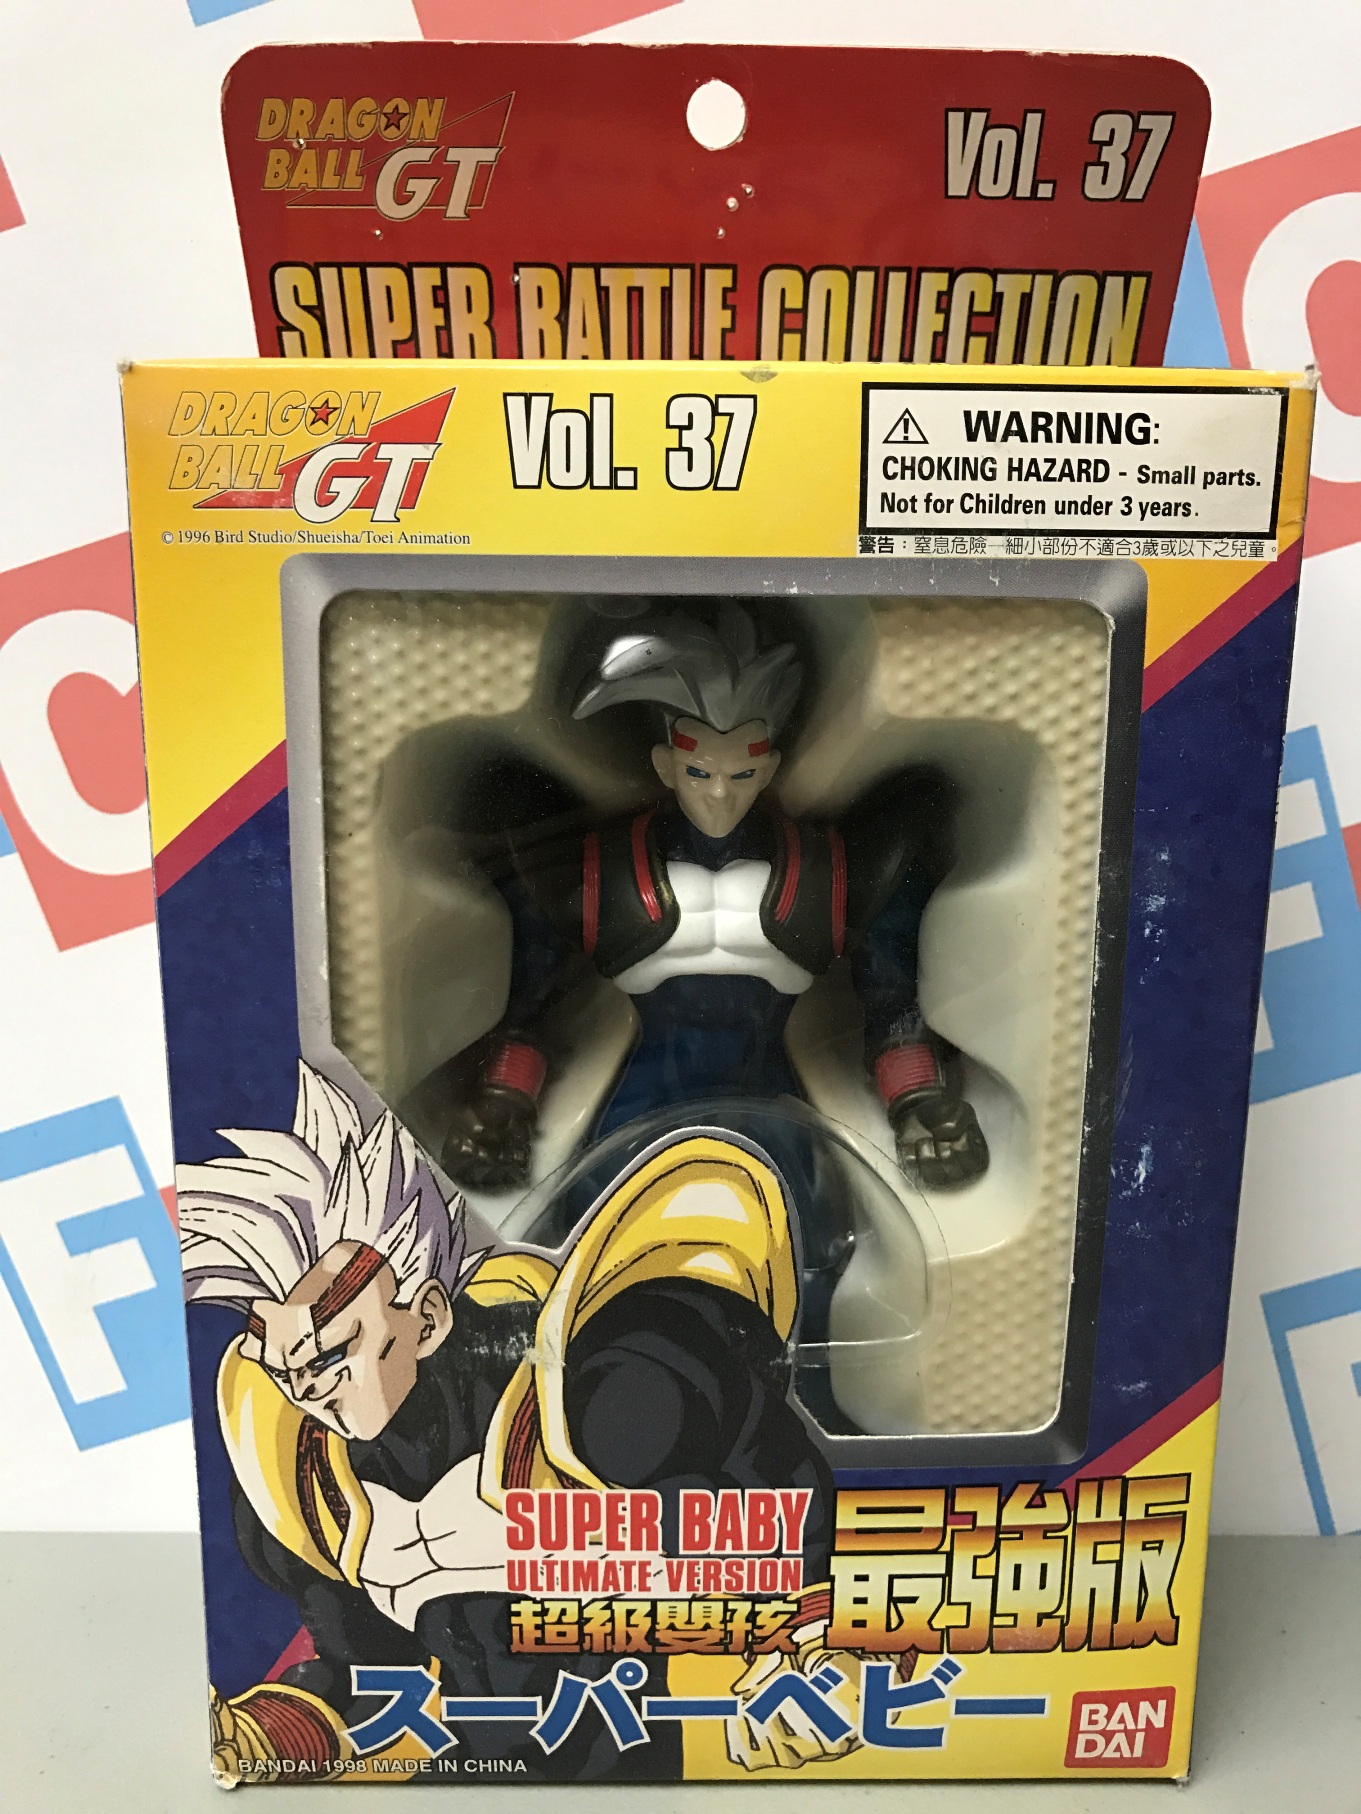 Dragonball GT - Bandai Super Battle Collection Super Baby Ultimate Version